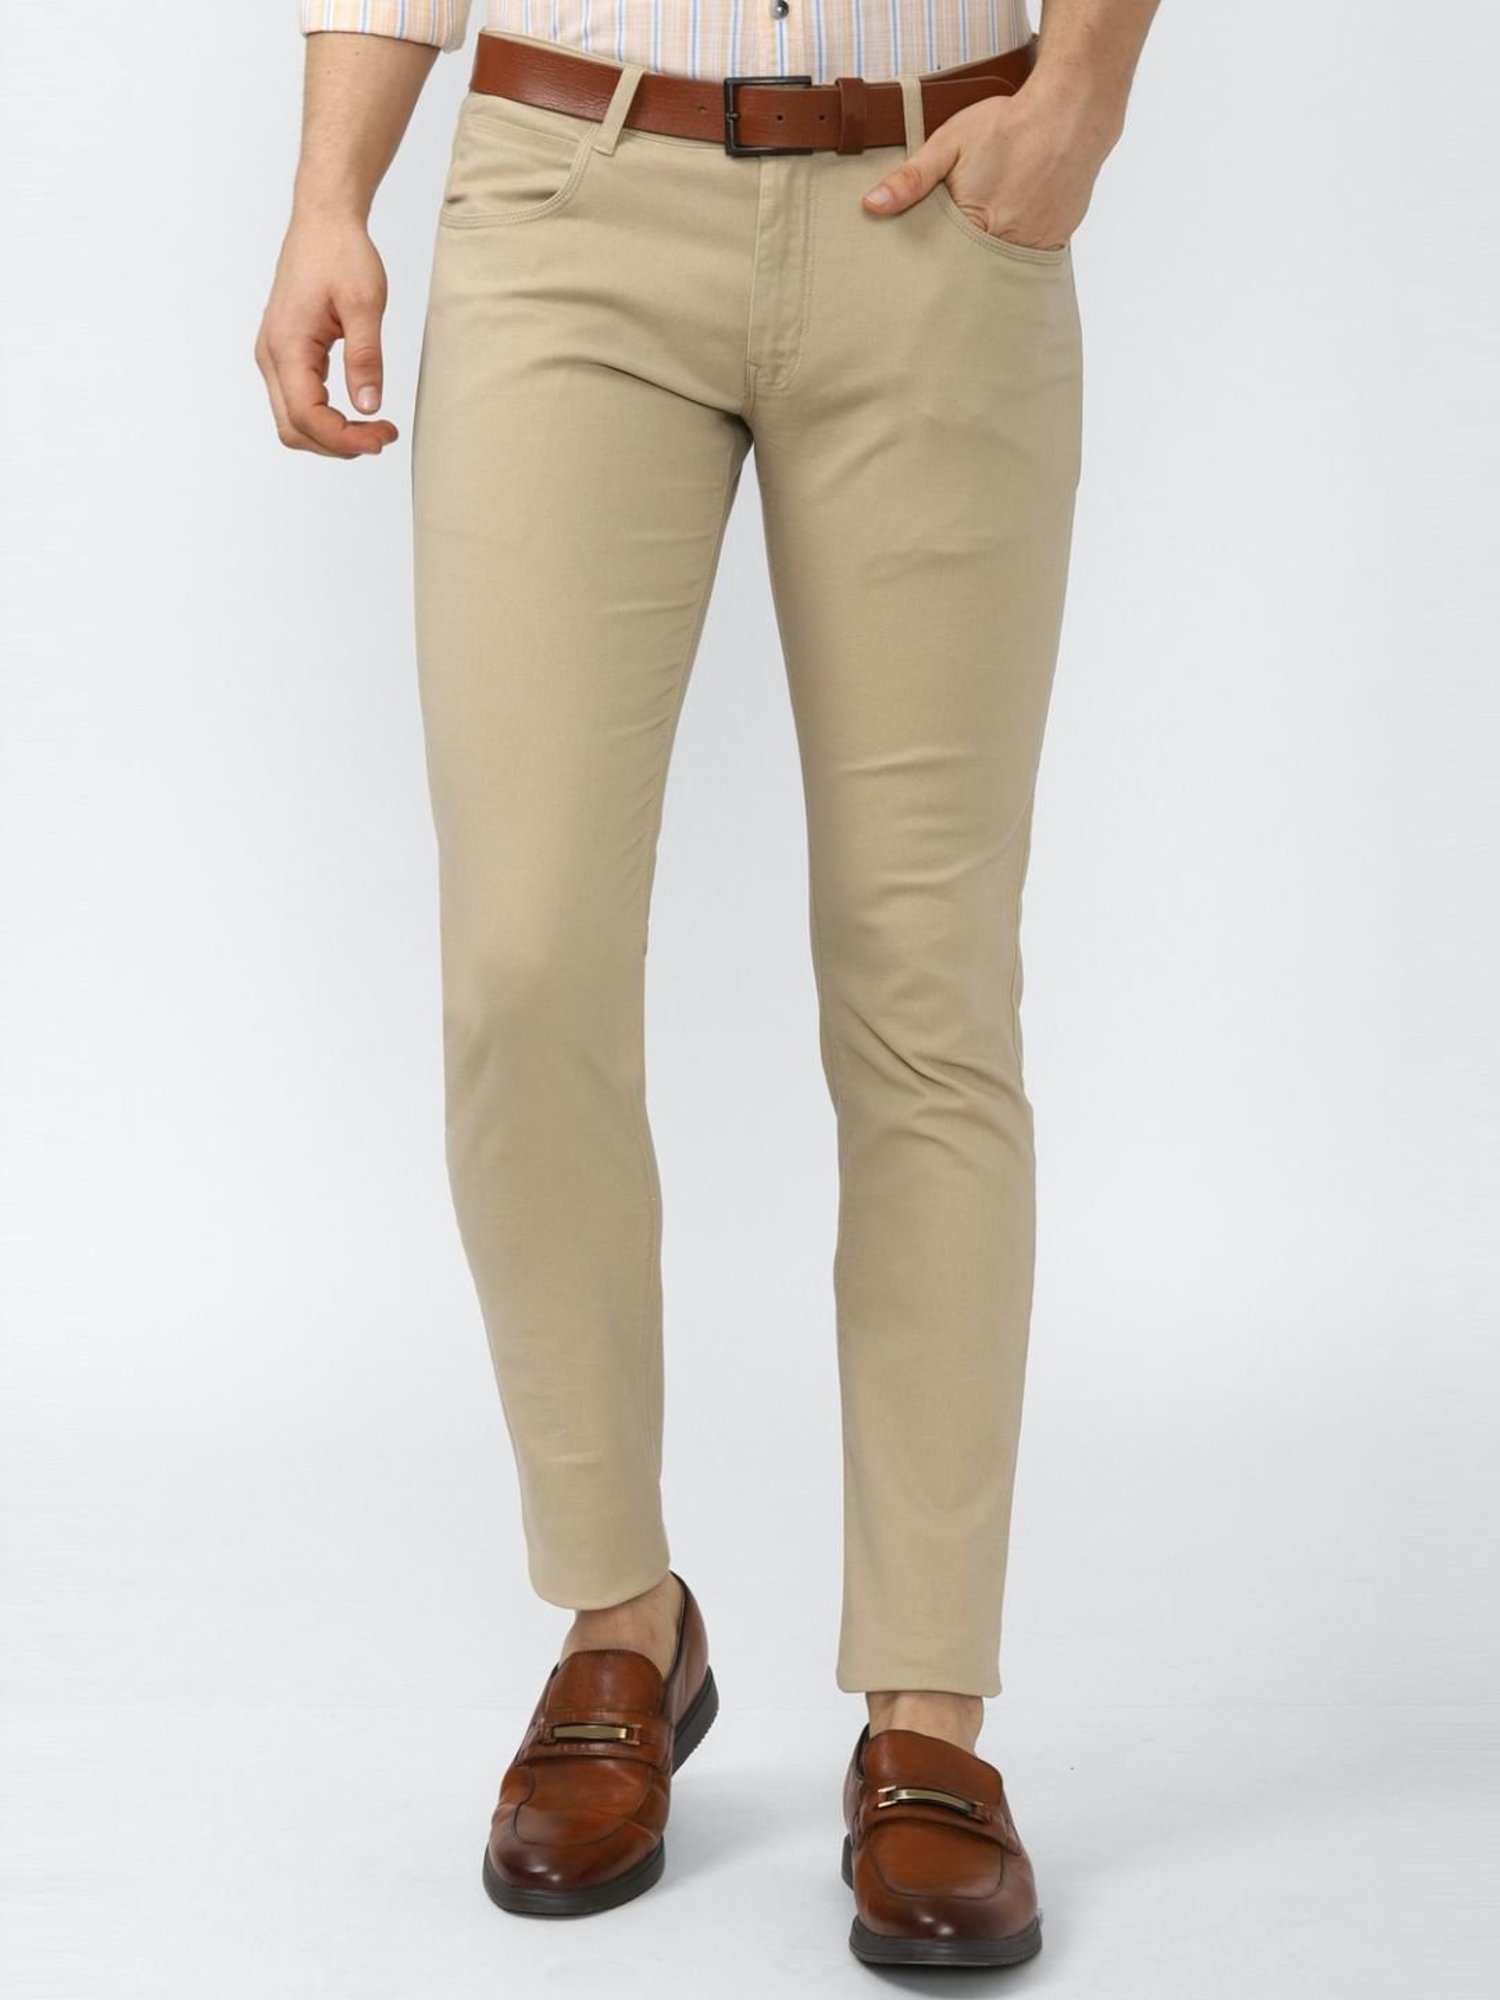 Buy Peter England Grey Cotton Slim Fit Trousers for Mens Online @ Tata CLiQ